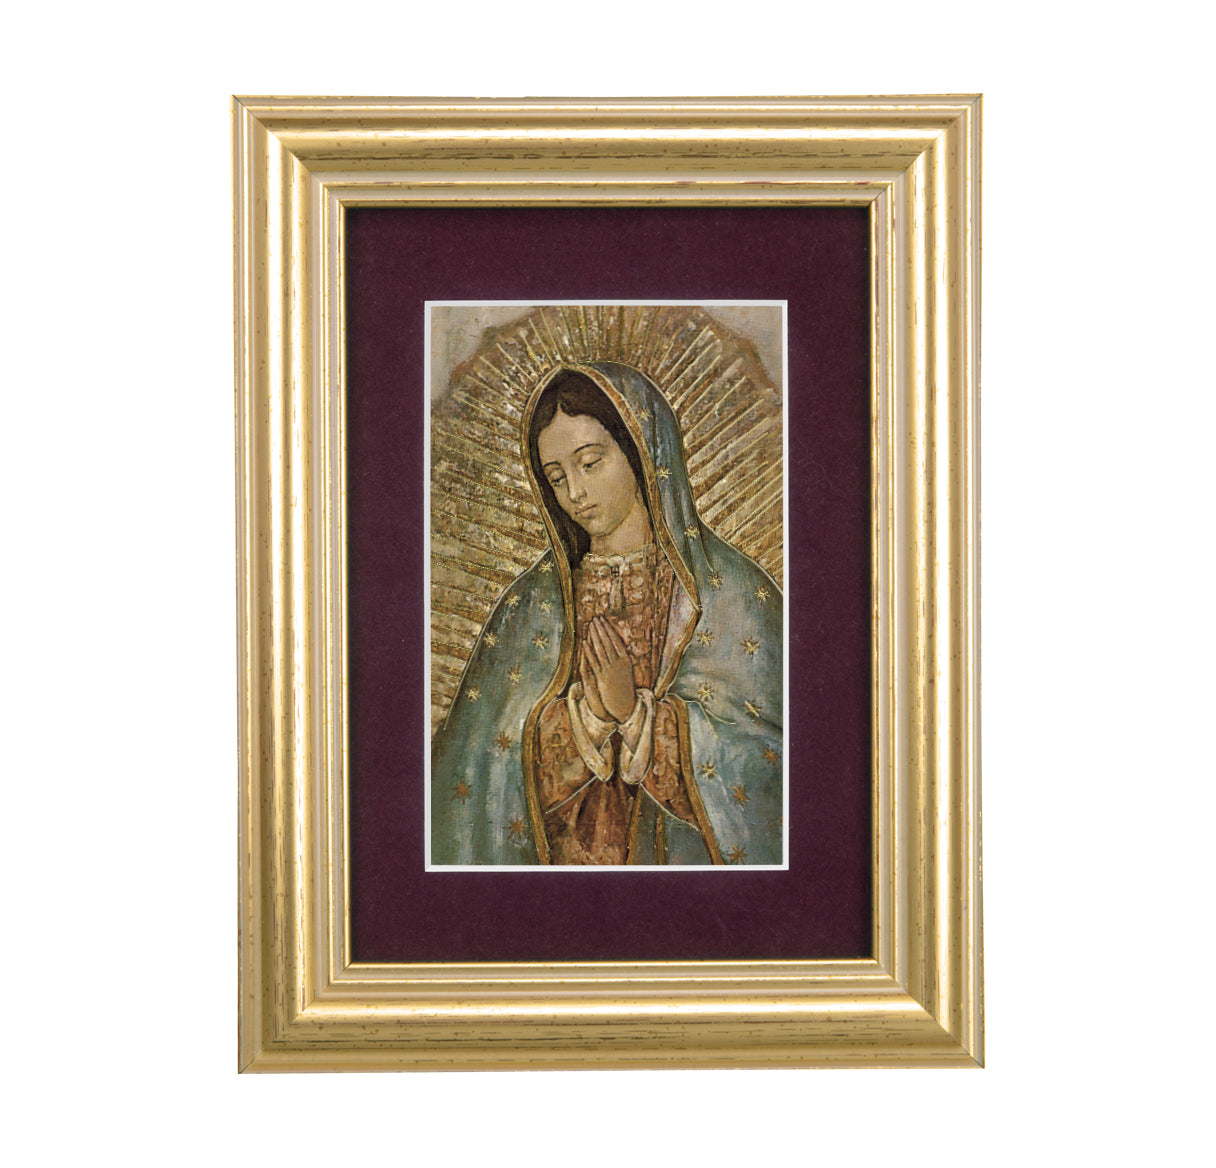 Our Lady of Guadalupe Framed Art with Maroon Velvet Matting